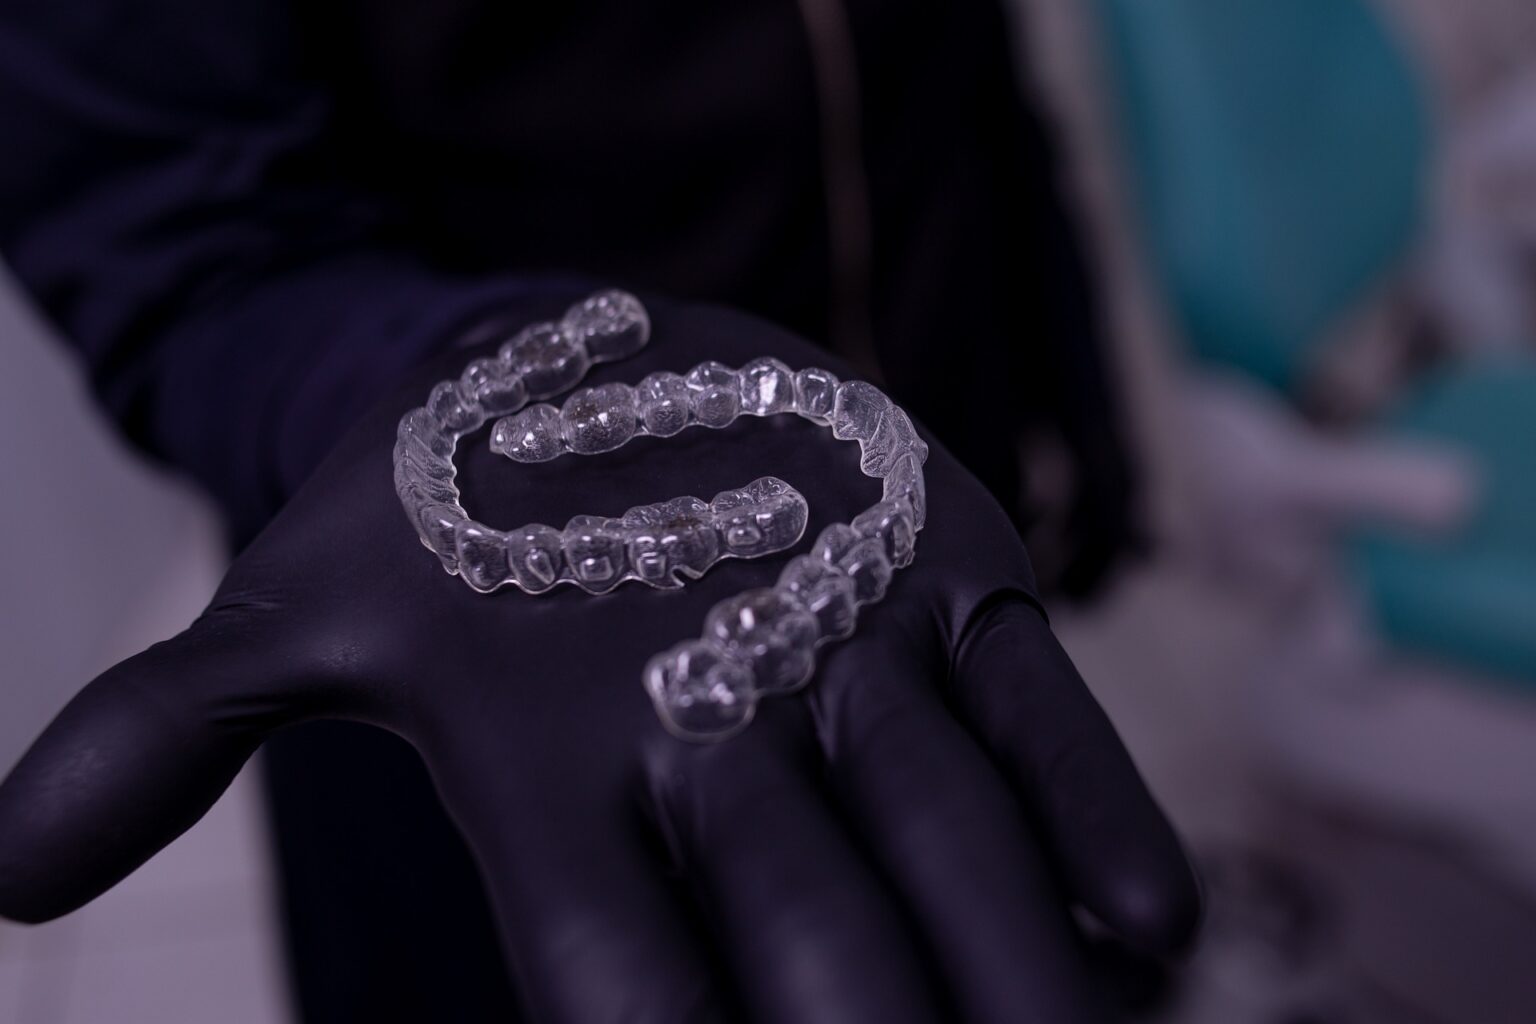 Clear aligners on a person’s hand